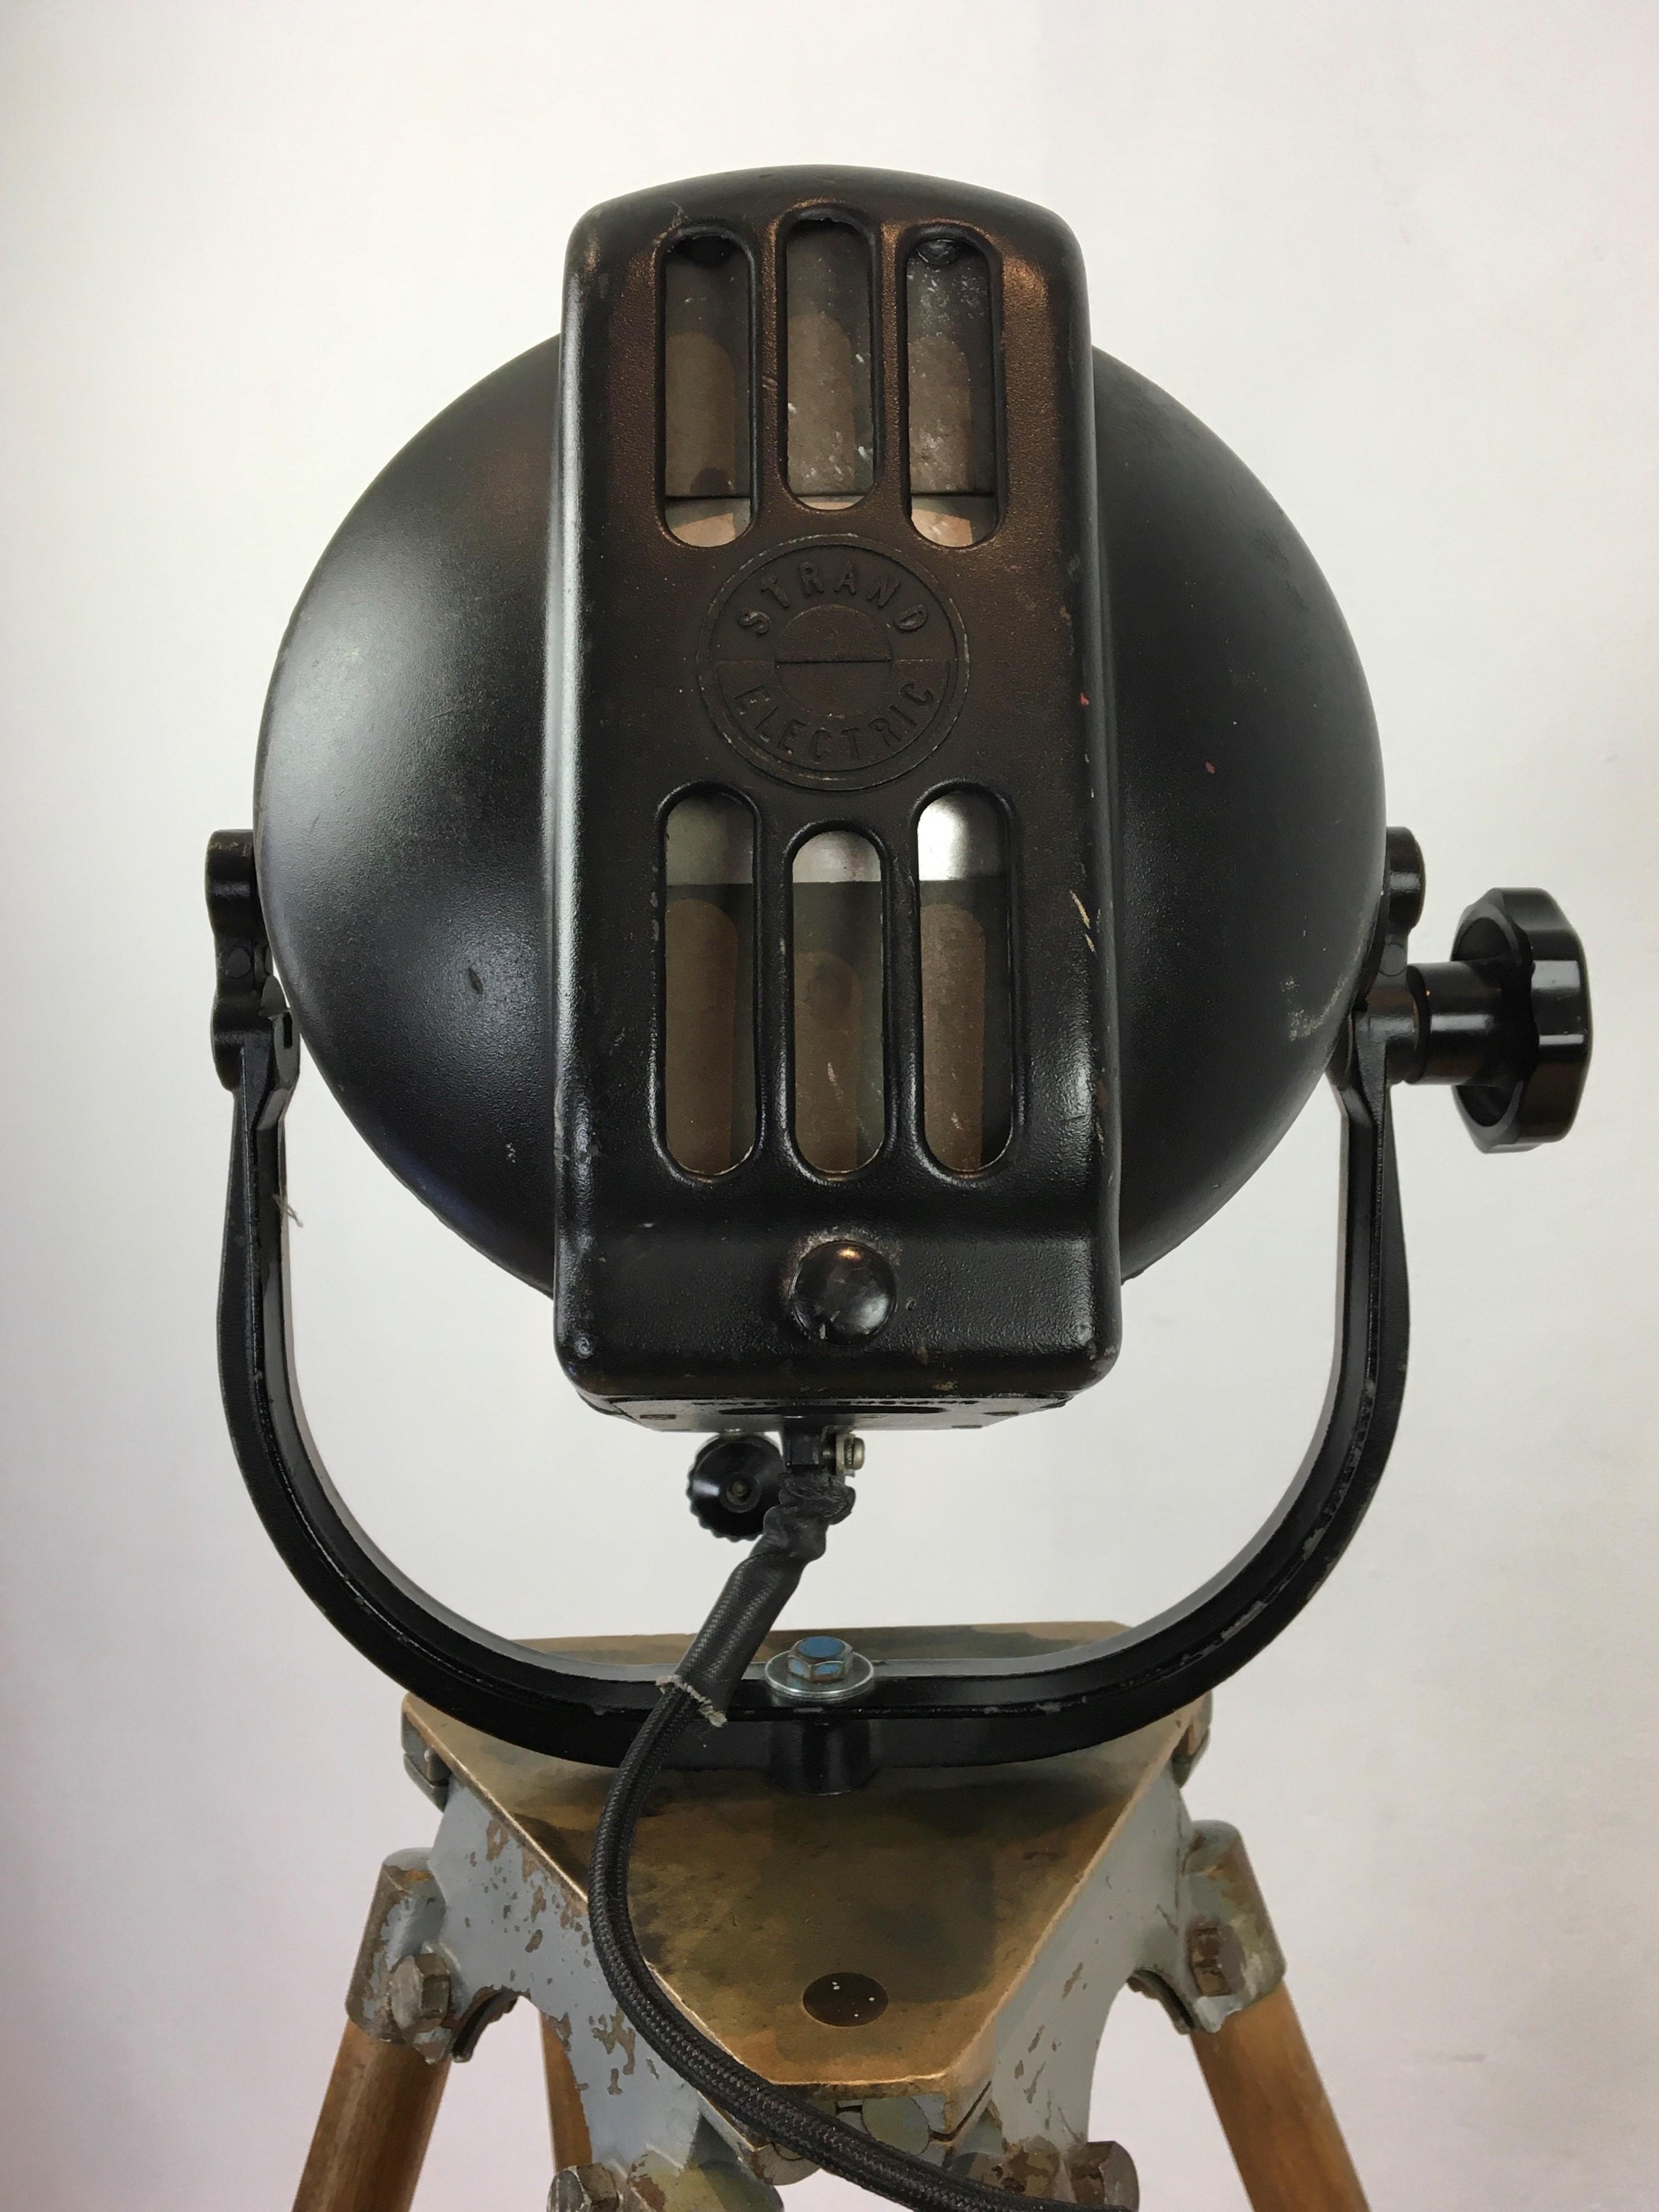 Strand Electric Theatre Stage Light on Tripod, England 2